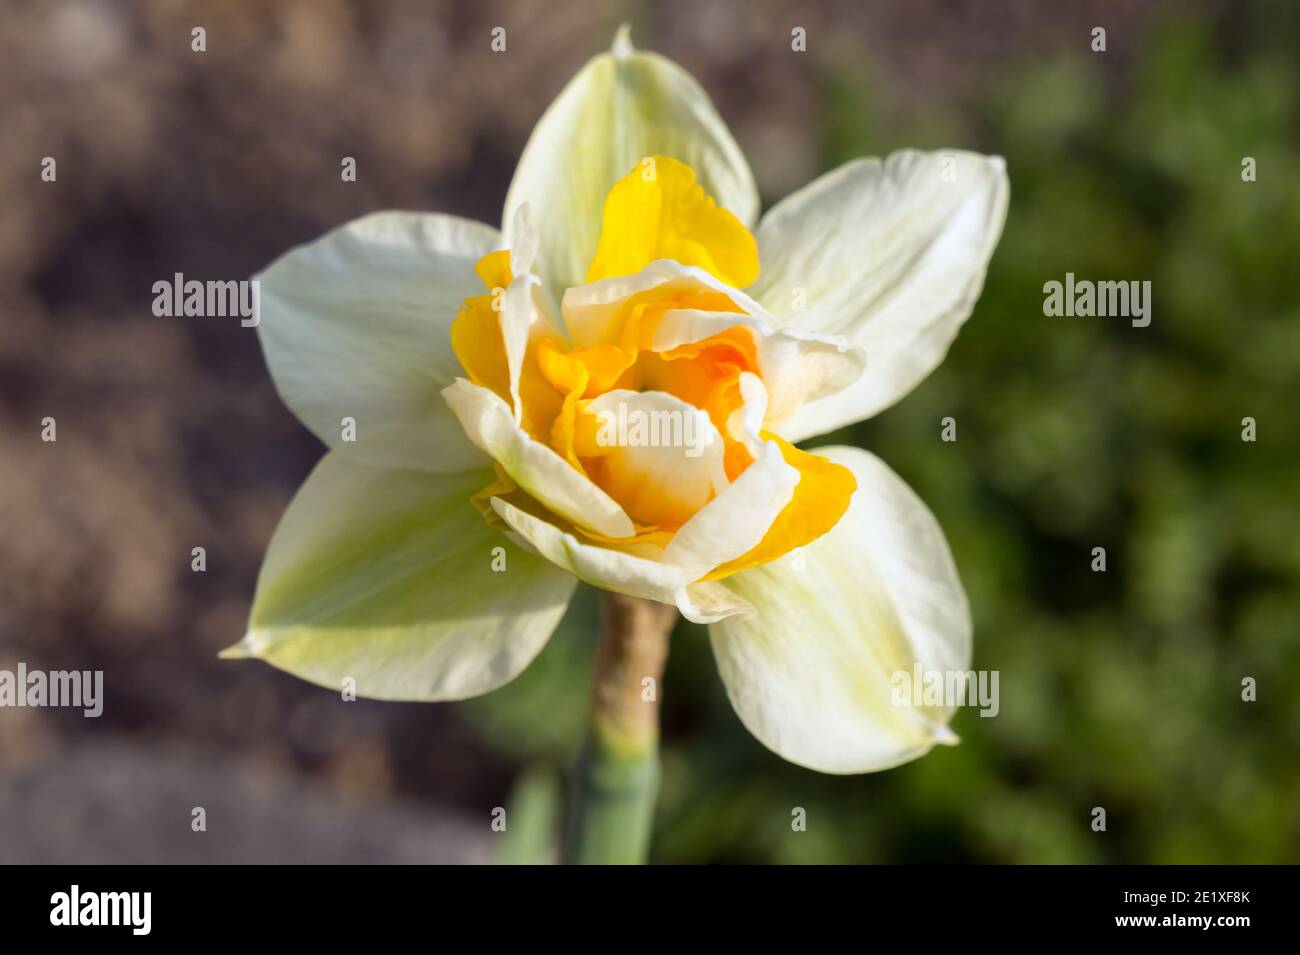 Early bulbous flower of decorative hybrid of Narcissus  in the garden on a spring sunny day. Stock Photo